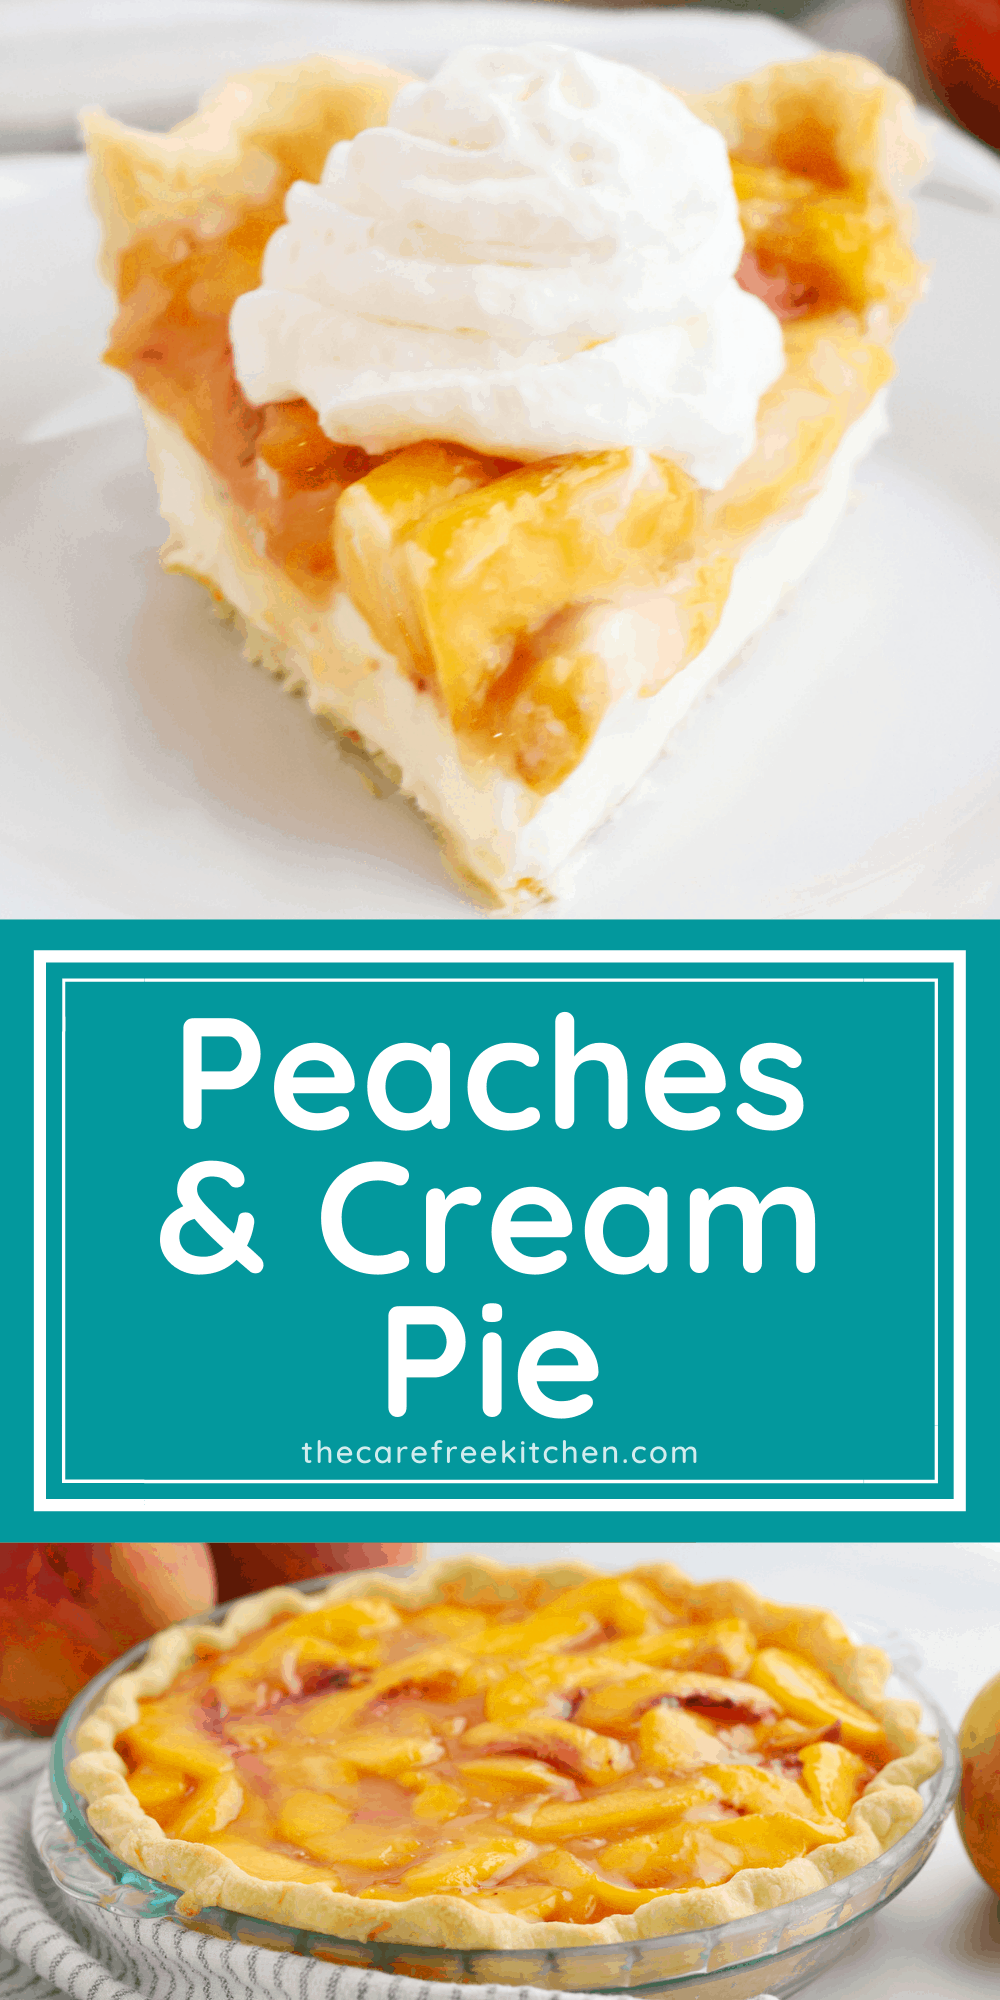 Peaches and Cream Pie - The Carefree Kitchen